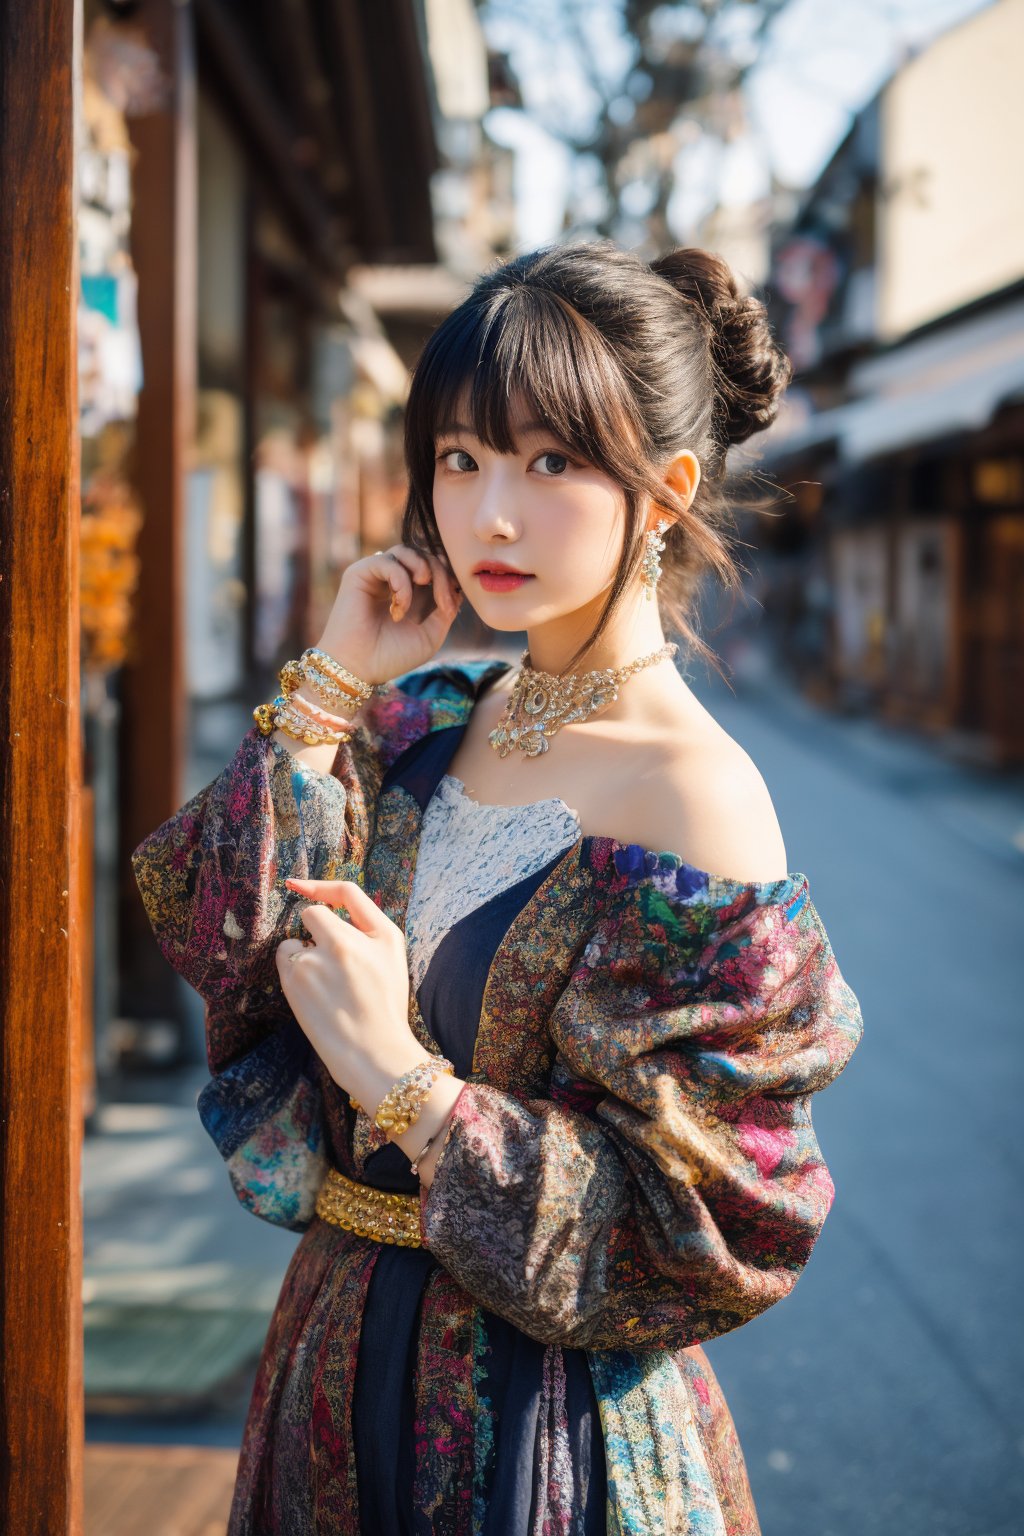 Masterpiece, best quality, super detailed, 
beautiful 20 years old Japanese girl, solo, 
exposed shoulder,
full body shot,
Sultry pose,
Hourglass full body, 
realistic portrait,
flower Hair clip,
updo hair,
Diamond drop earrings,
brown Alluring eyes,
pouty,
Graceful hands,
beaded bracelet,
beautiful Slim leg,
clogs,
kimono dress,
Kyoto street,
Sakura is floating,Sittingw